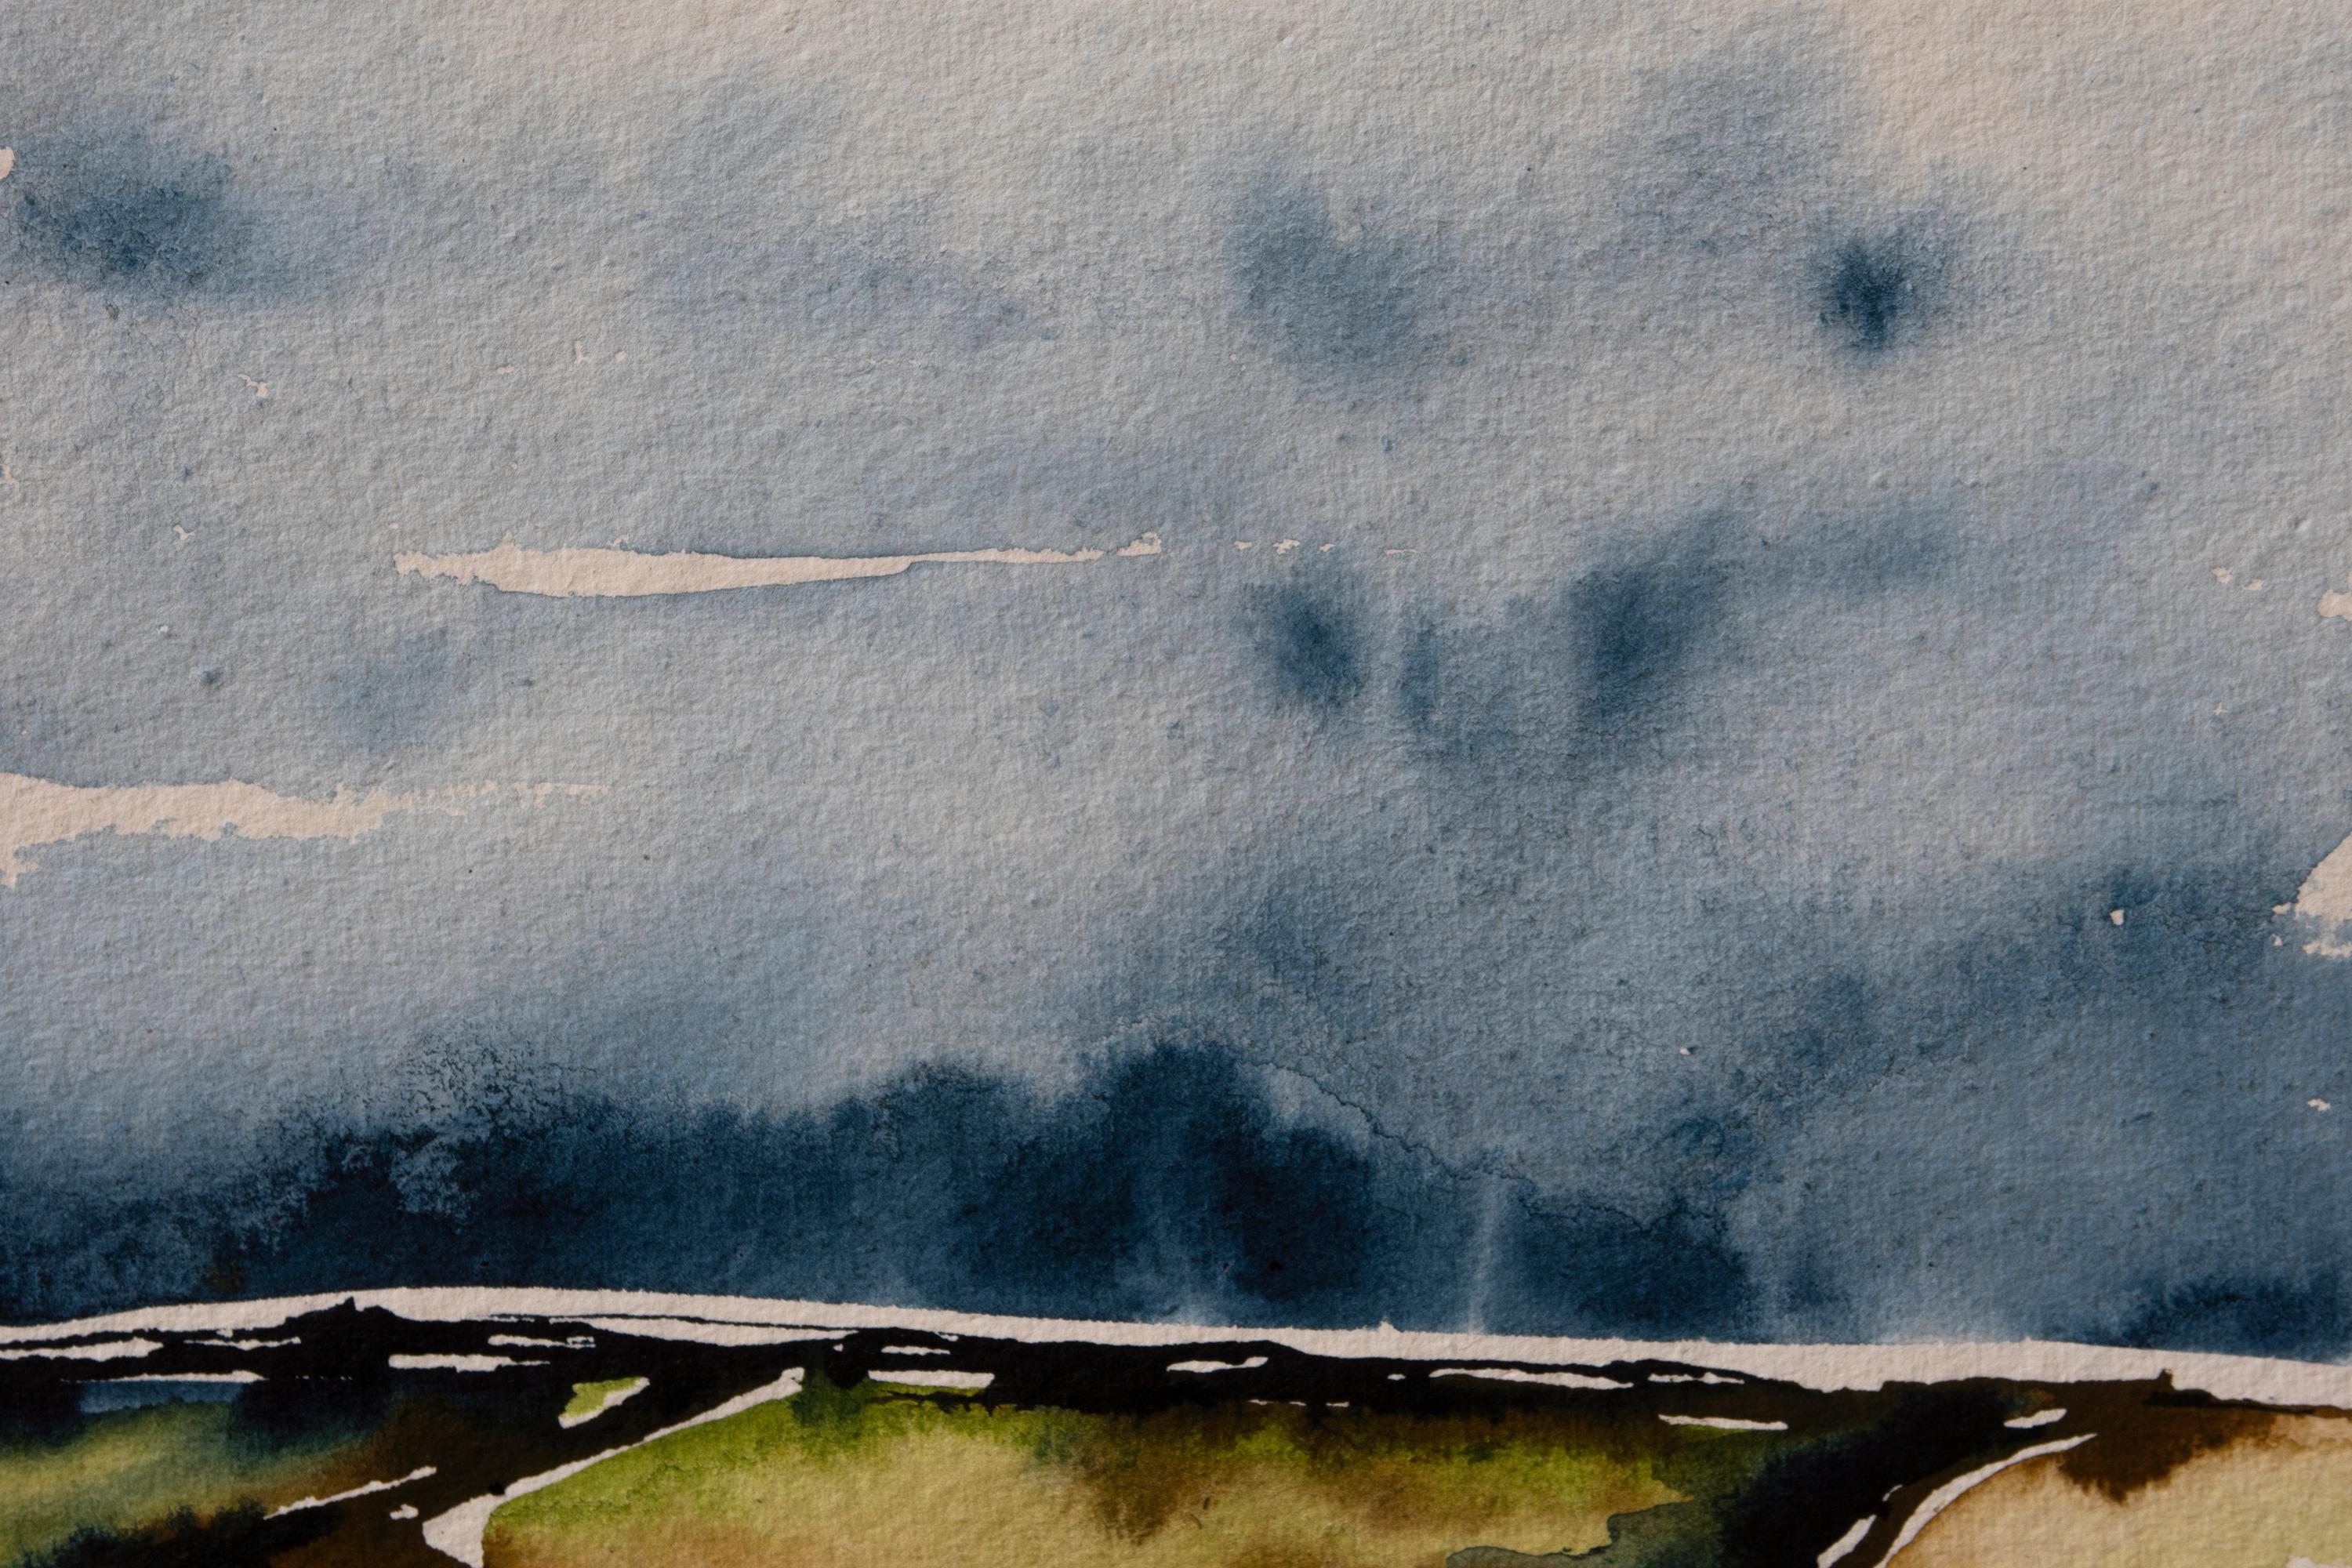 'Fall Fog, Approaching'. Contemporary landscape painting, Cornwall
Original Artwork, Unframed
_________________
Heavy skies moving in over the autumnal landscape of West Cornwall: a harshly beautiful peninsula, jutting out into the wild tireless